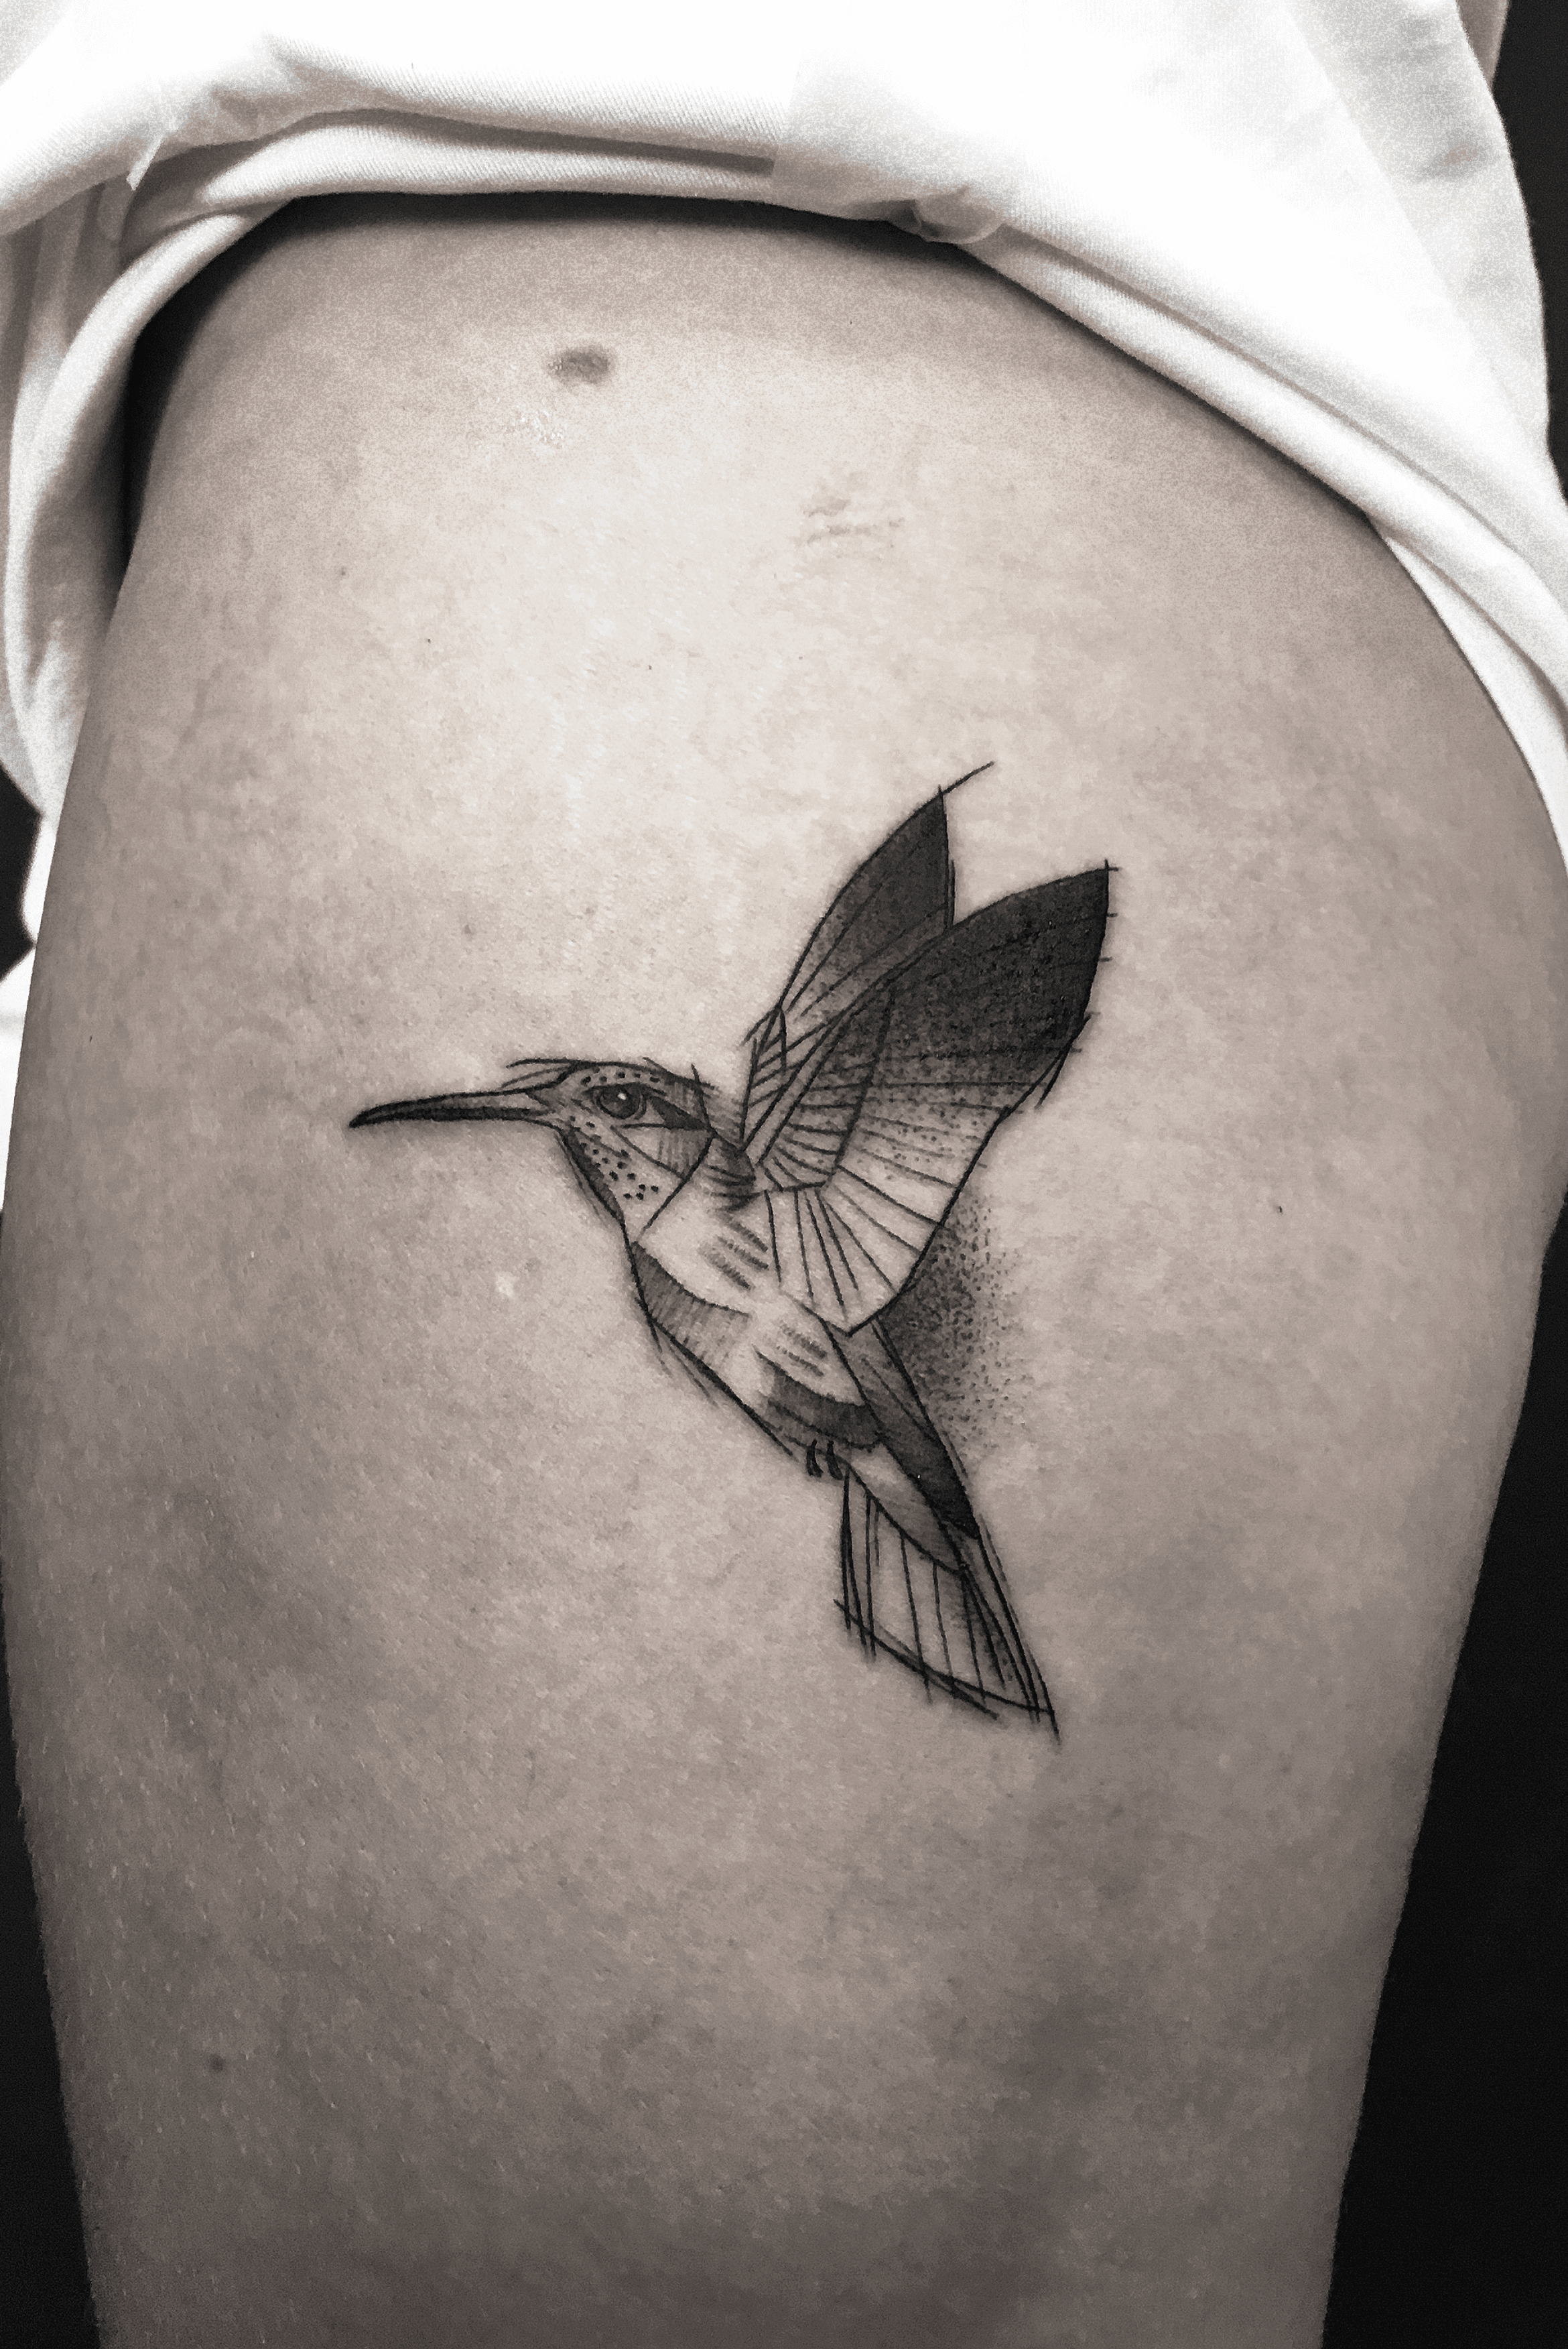 10 Best Mini Small Hummingbird Tattoo IdeasCollected By Daily Hind News   Daily Hind News